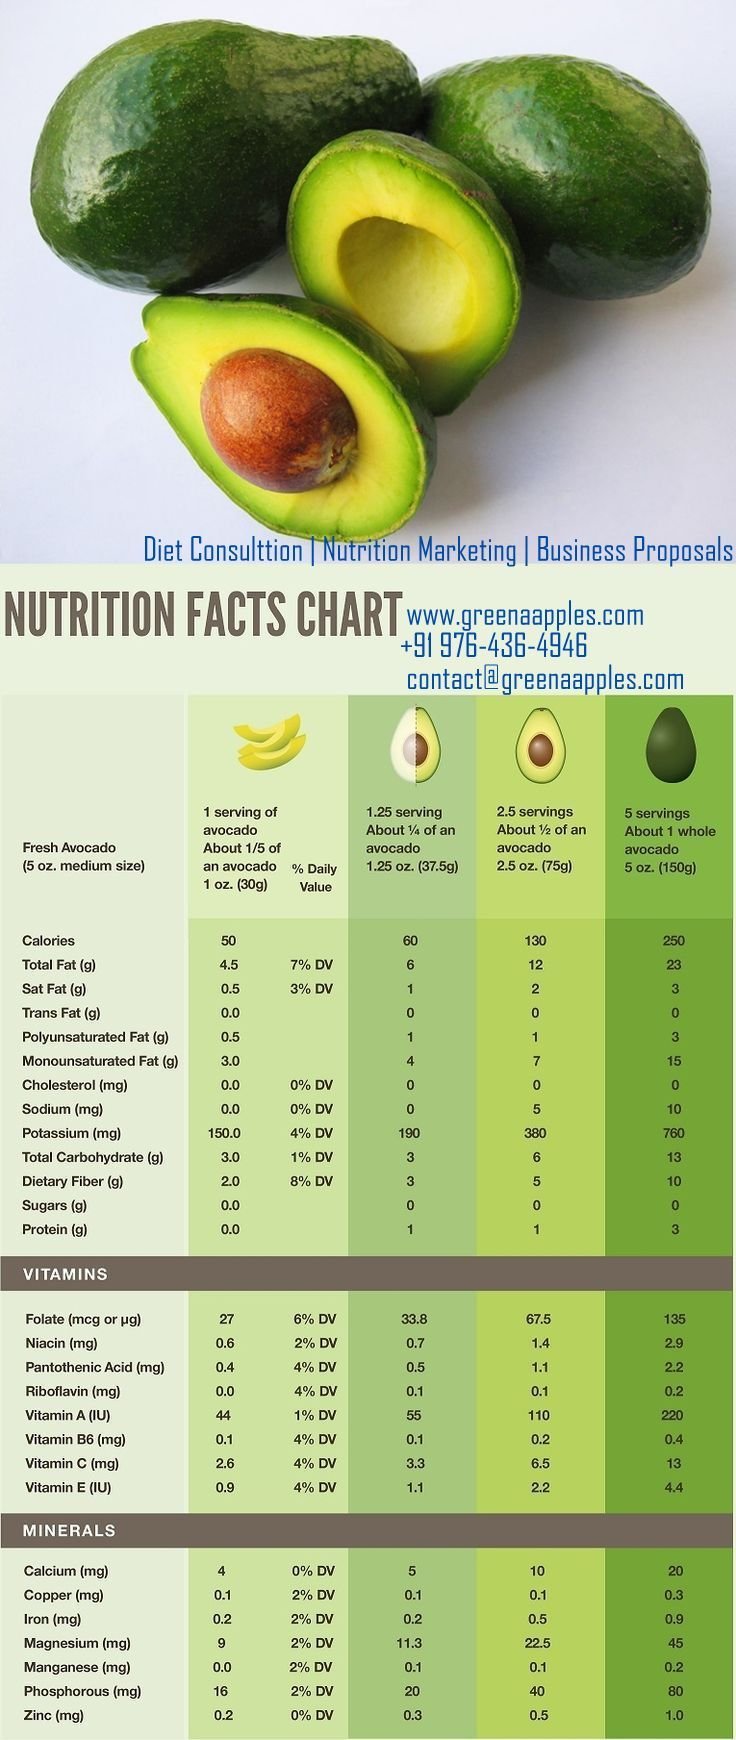 Nutritional Facts Chart for Avocado